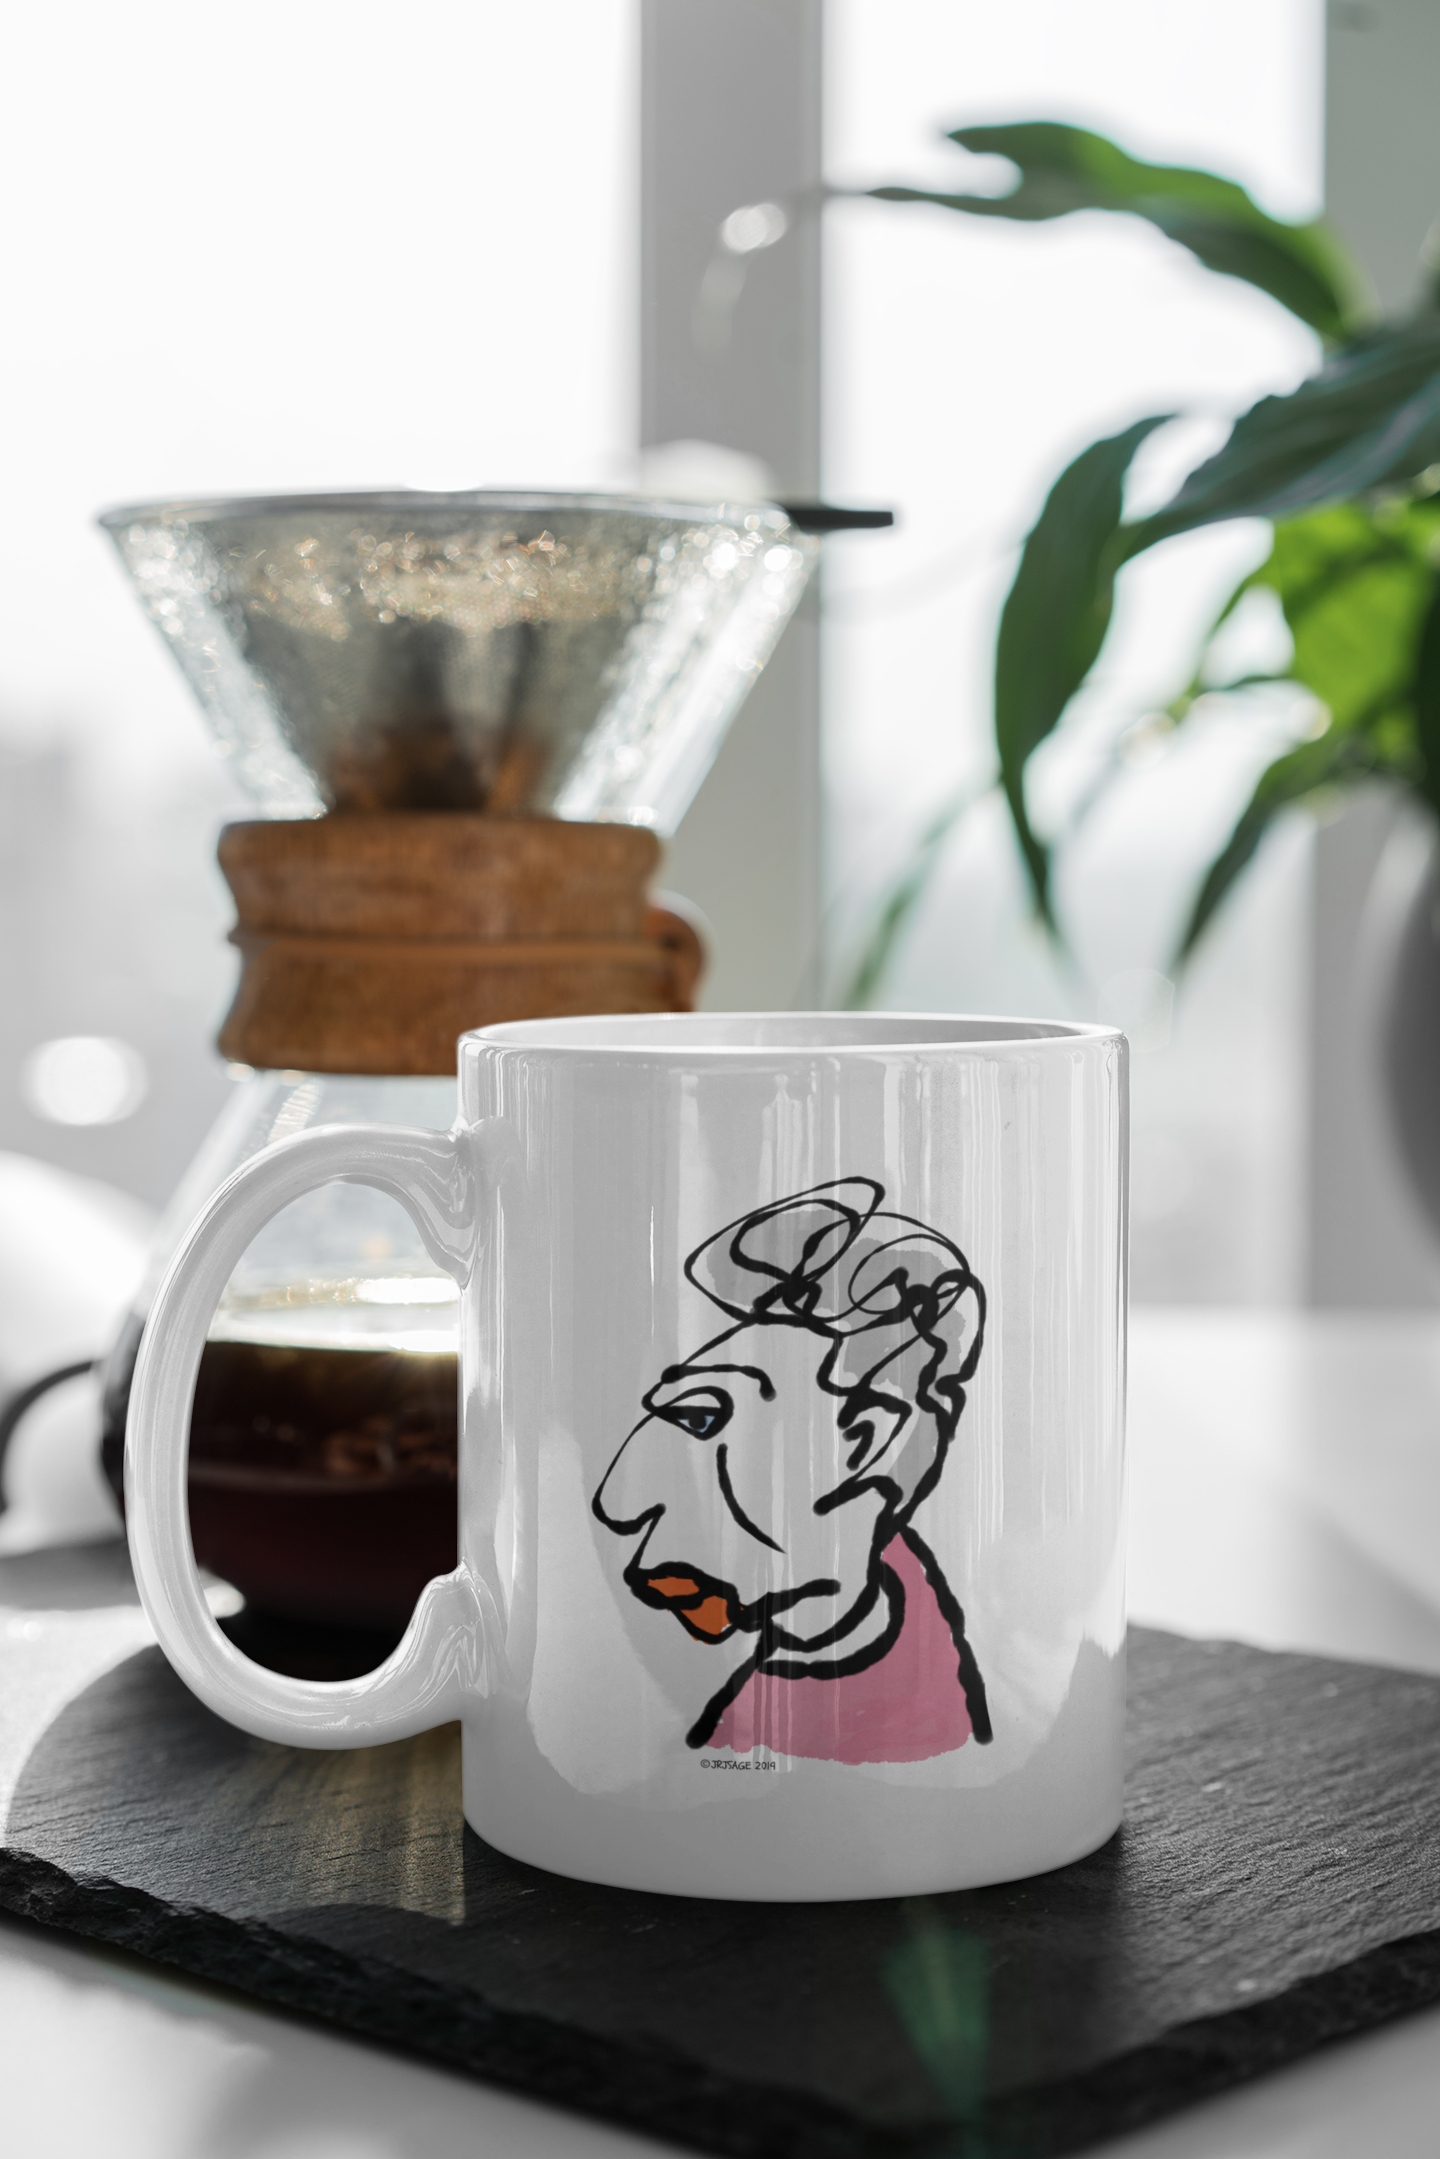 Glamorous Granny illustration on a white ceramic mug by Hector and Bone on a table